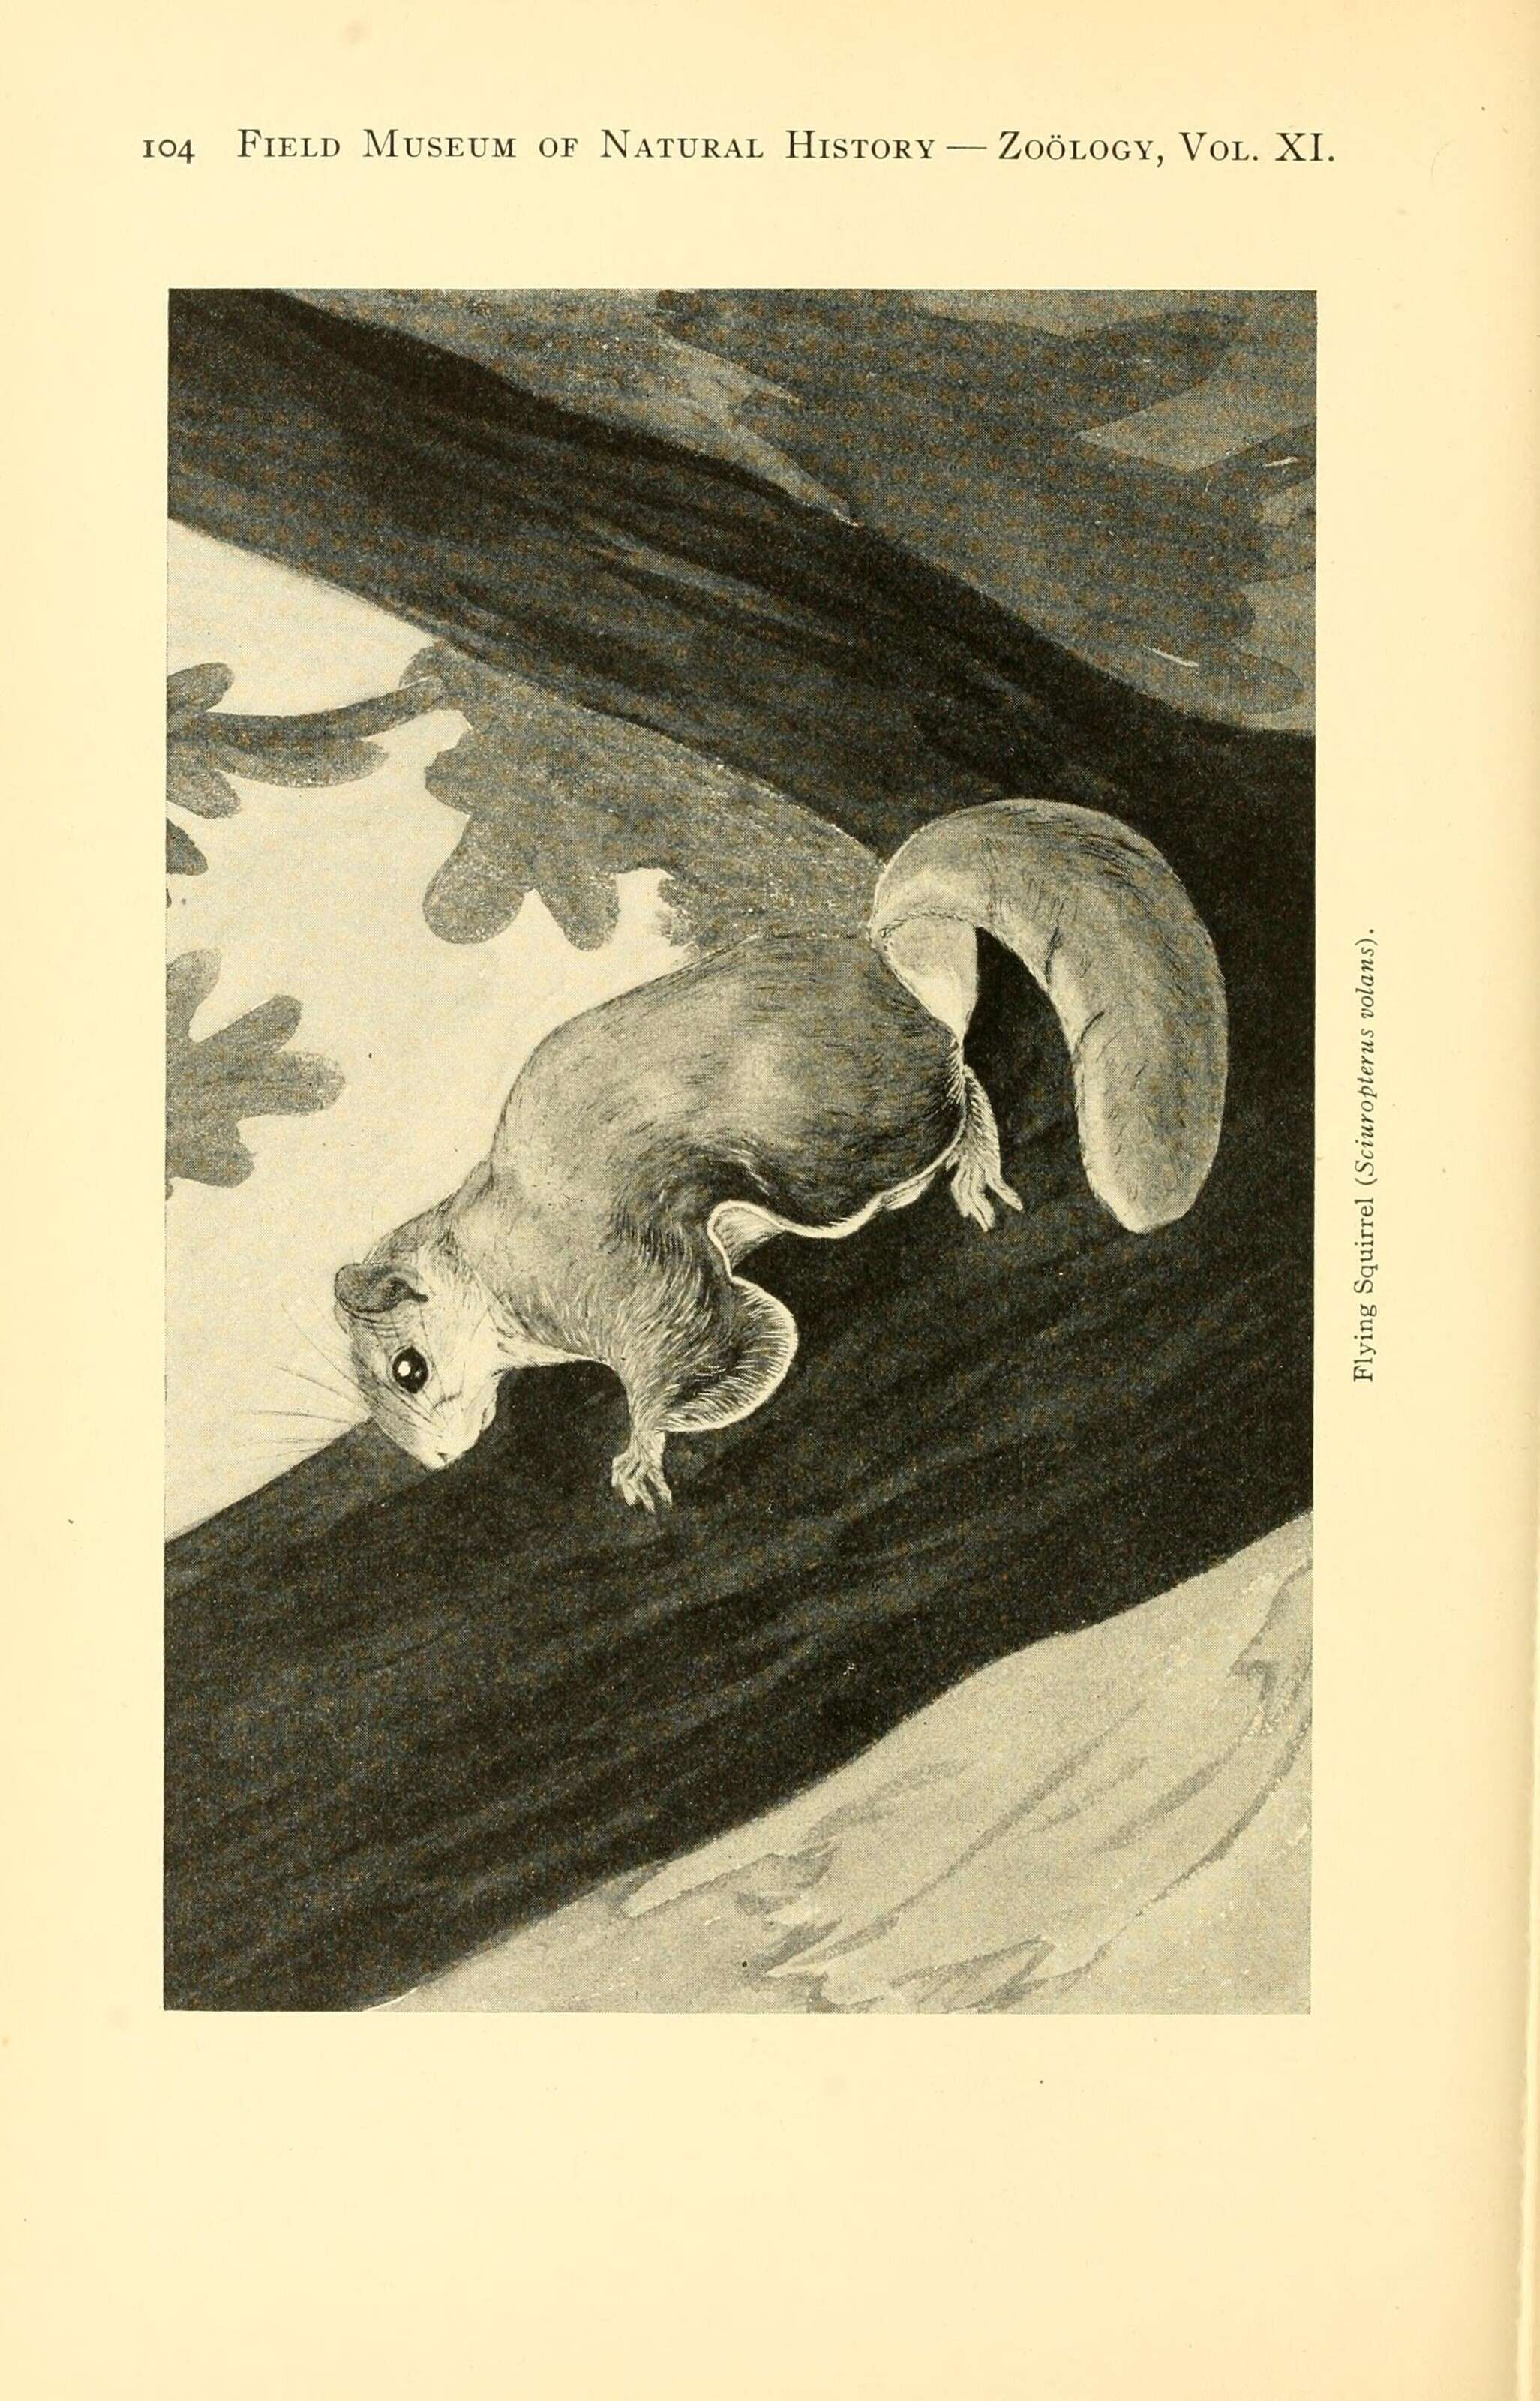 Image of Mexican Flying Squirrel